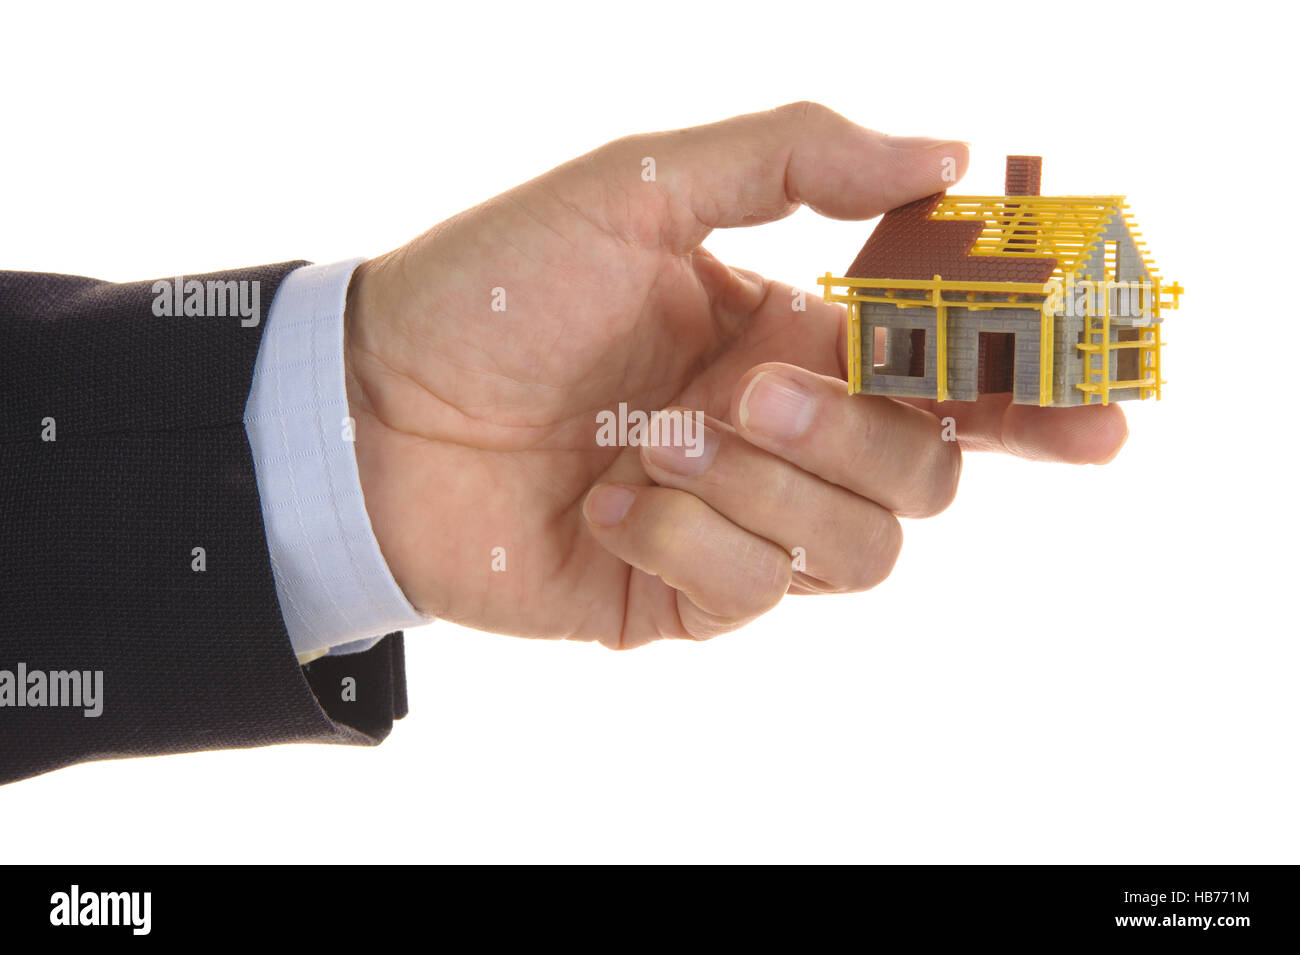 model house for sale in hand Stock Photo